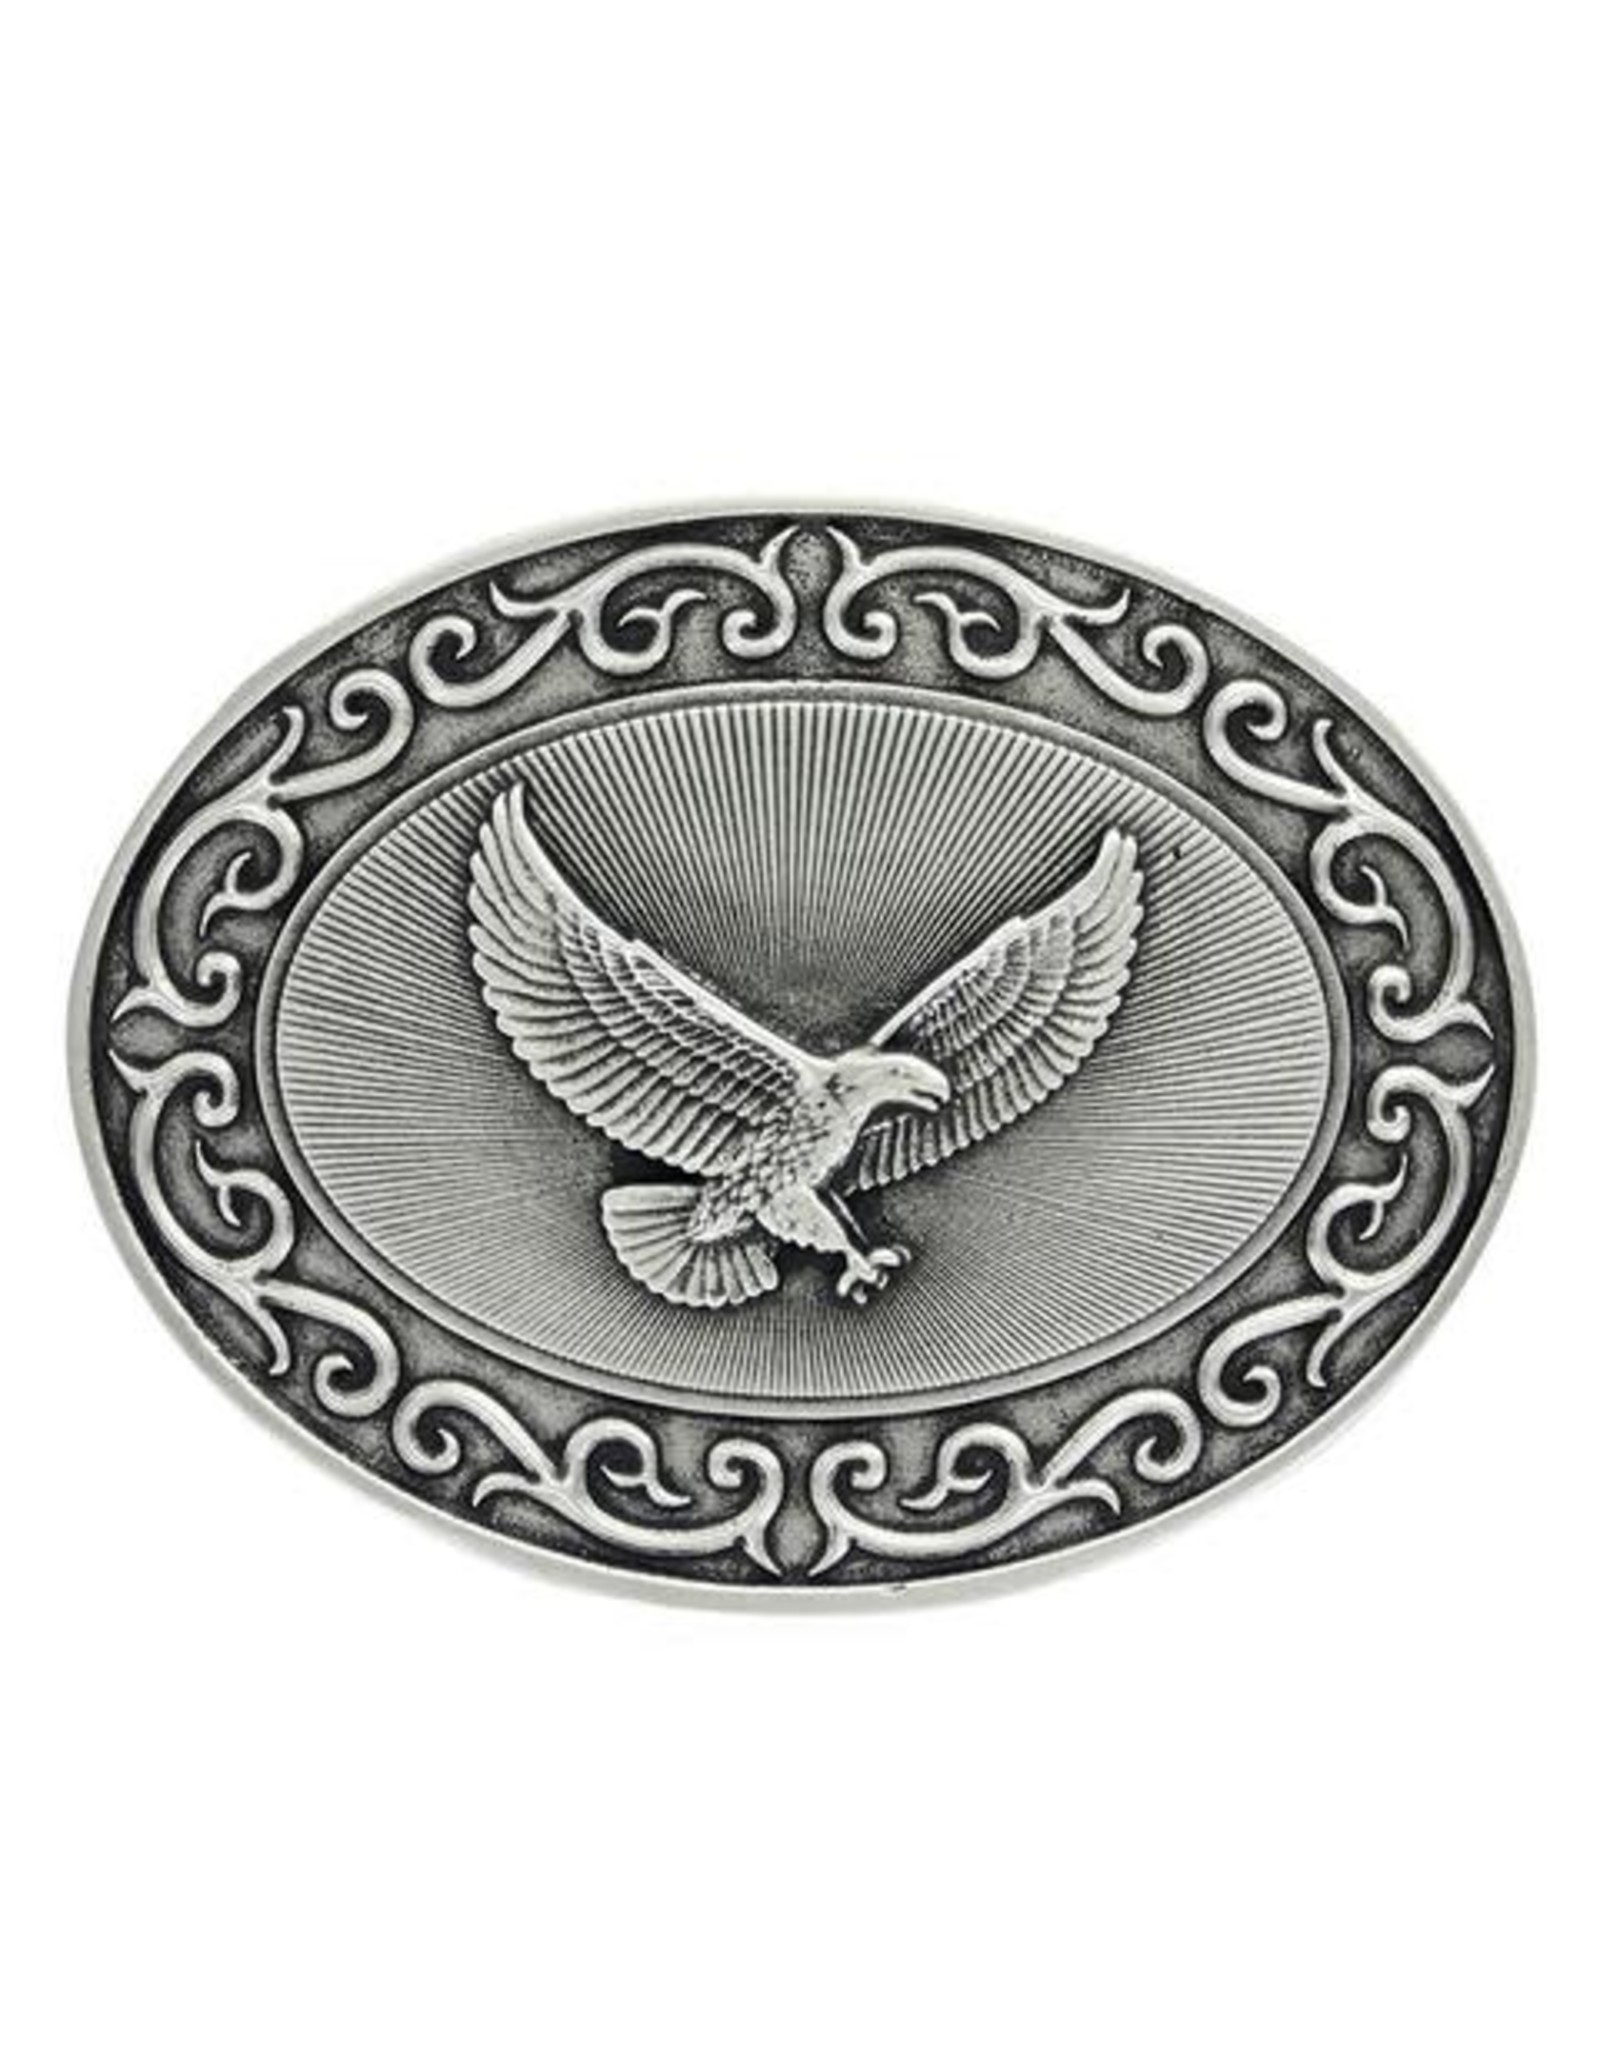 Attitude Jewelry Attitude Ready for Action Eagle A859 Belt Buckle